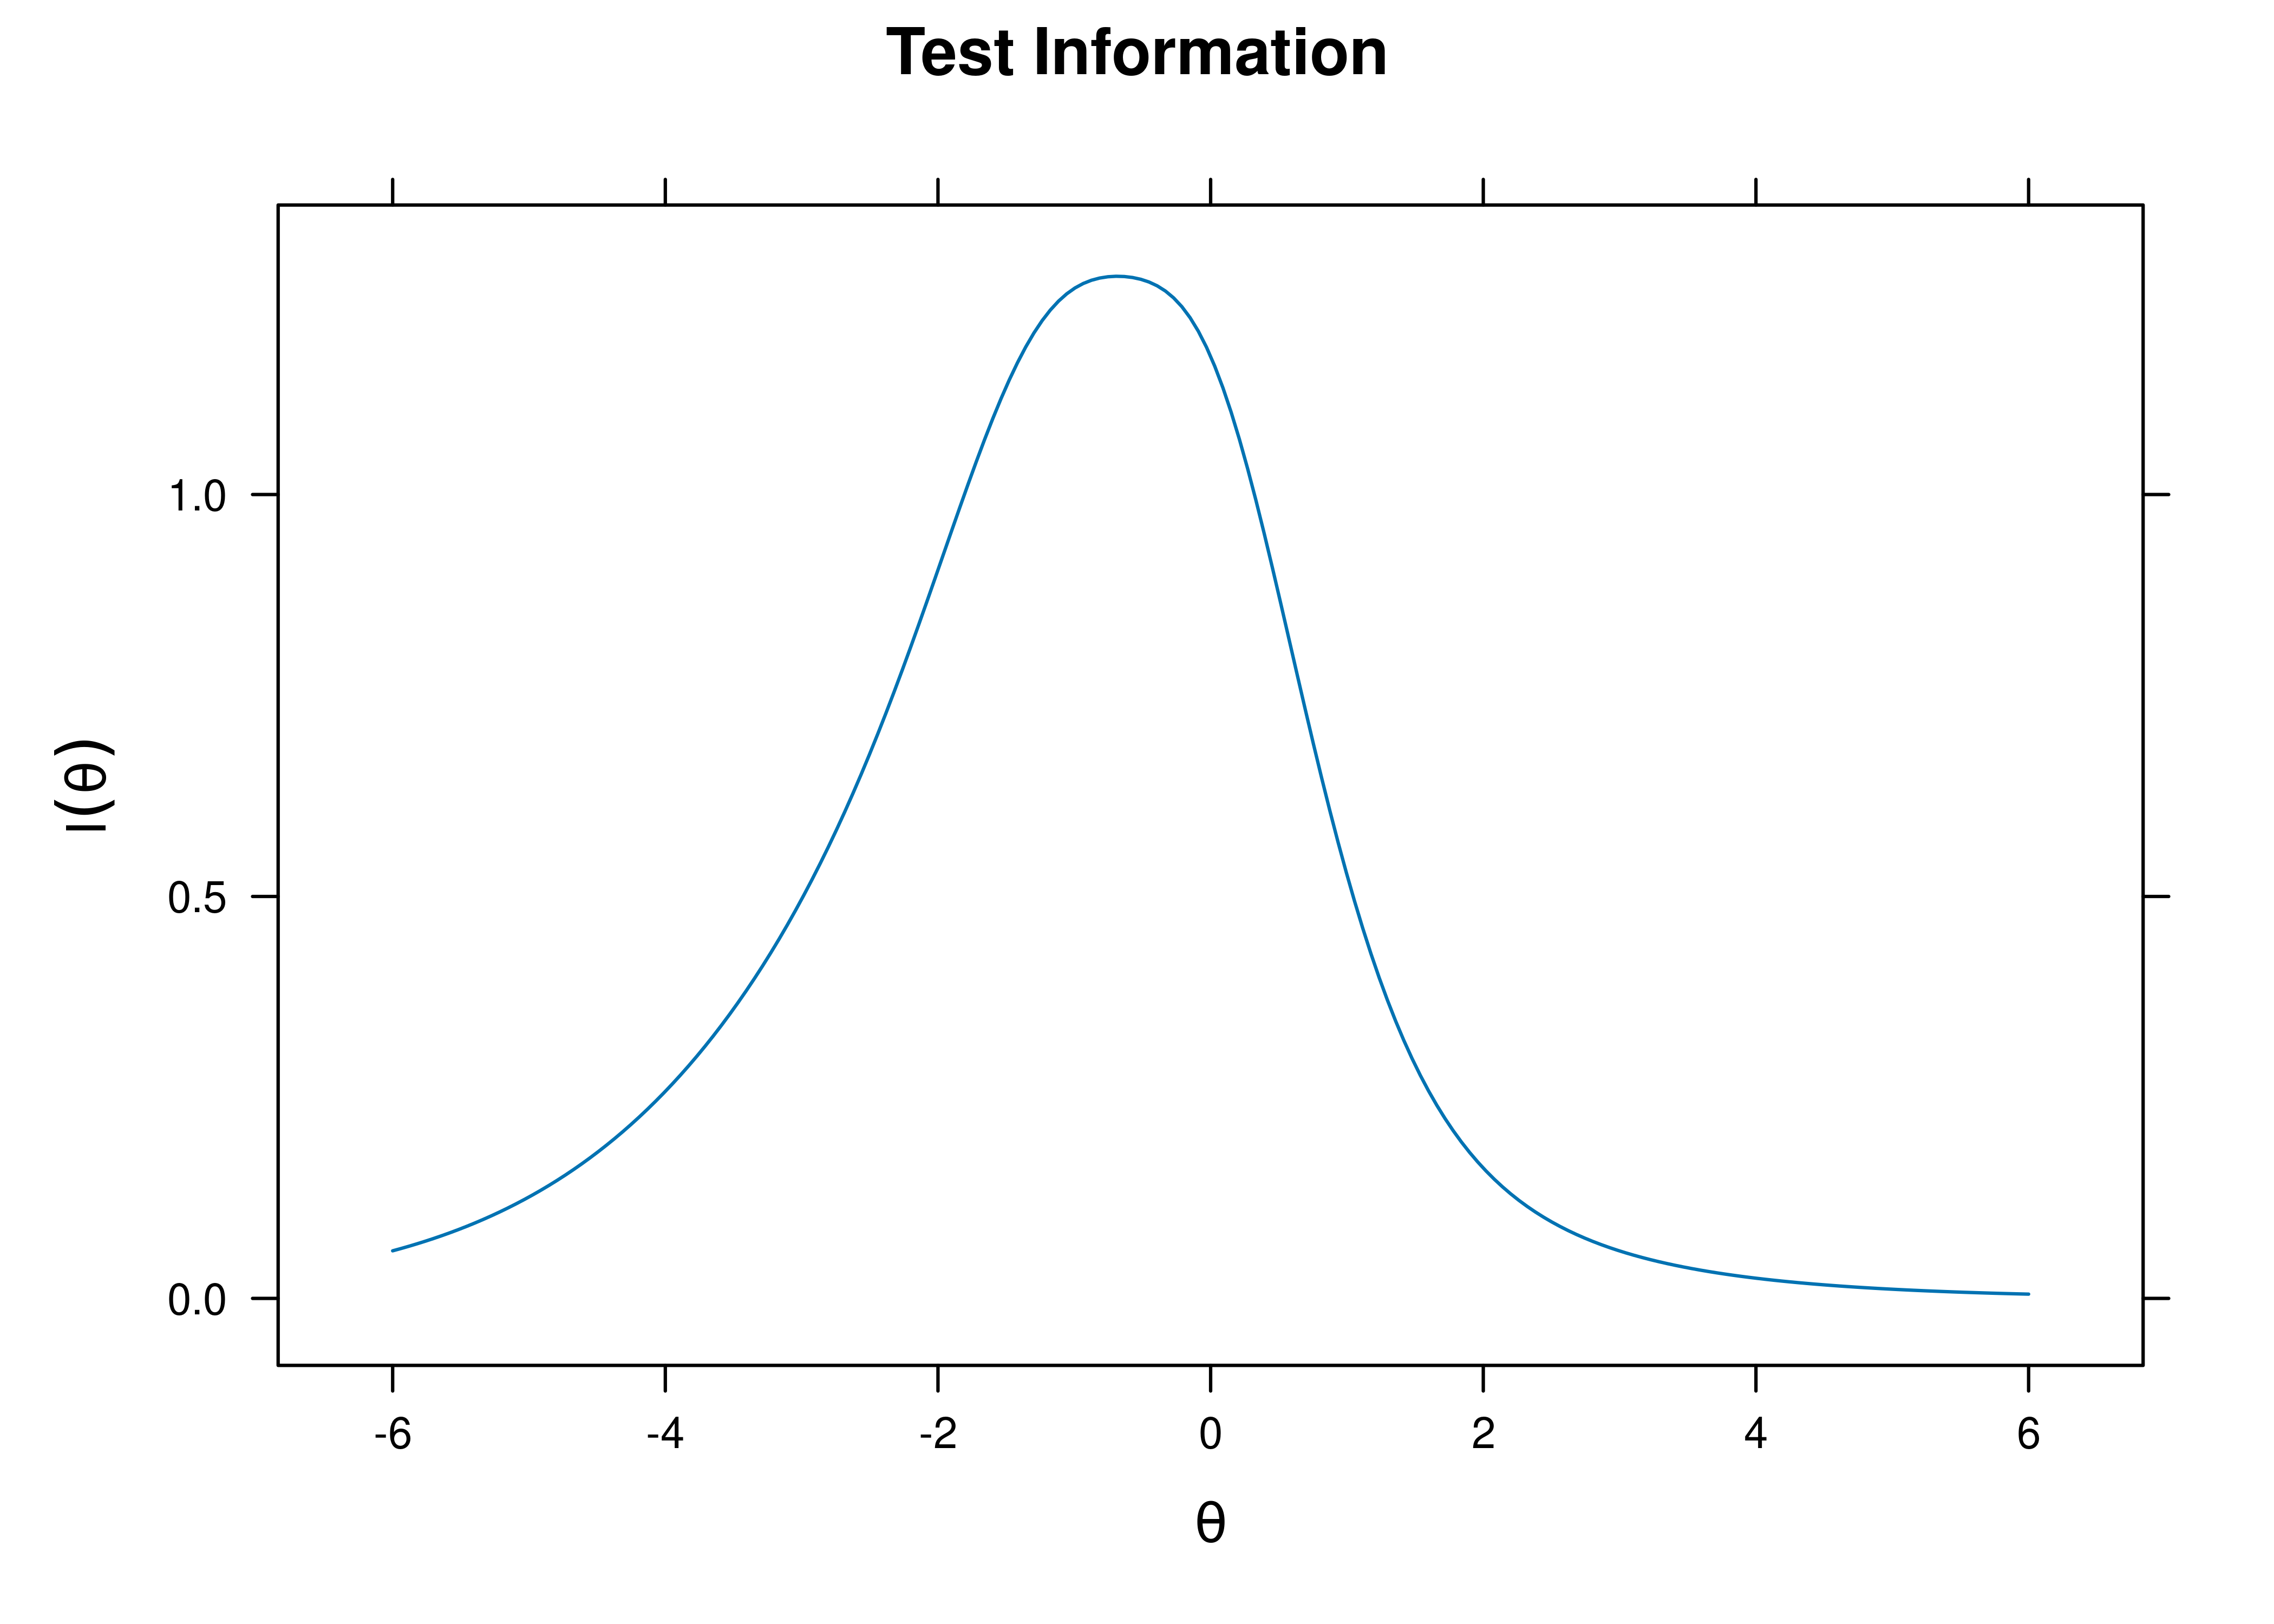 Test Information Curve From Three-Parameter Logistic Item Response Theory Model.